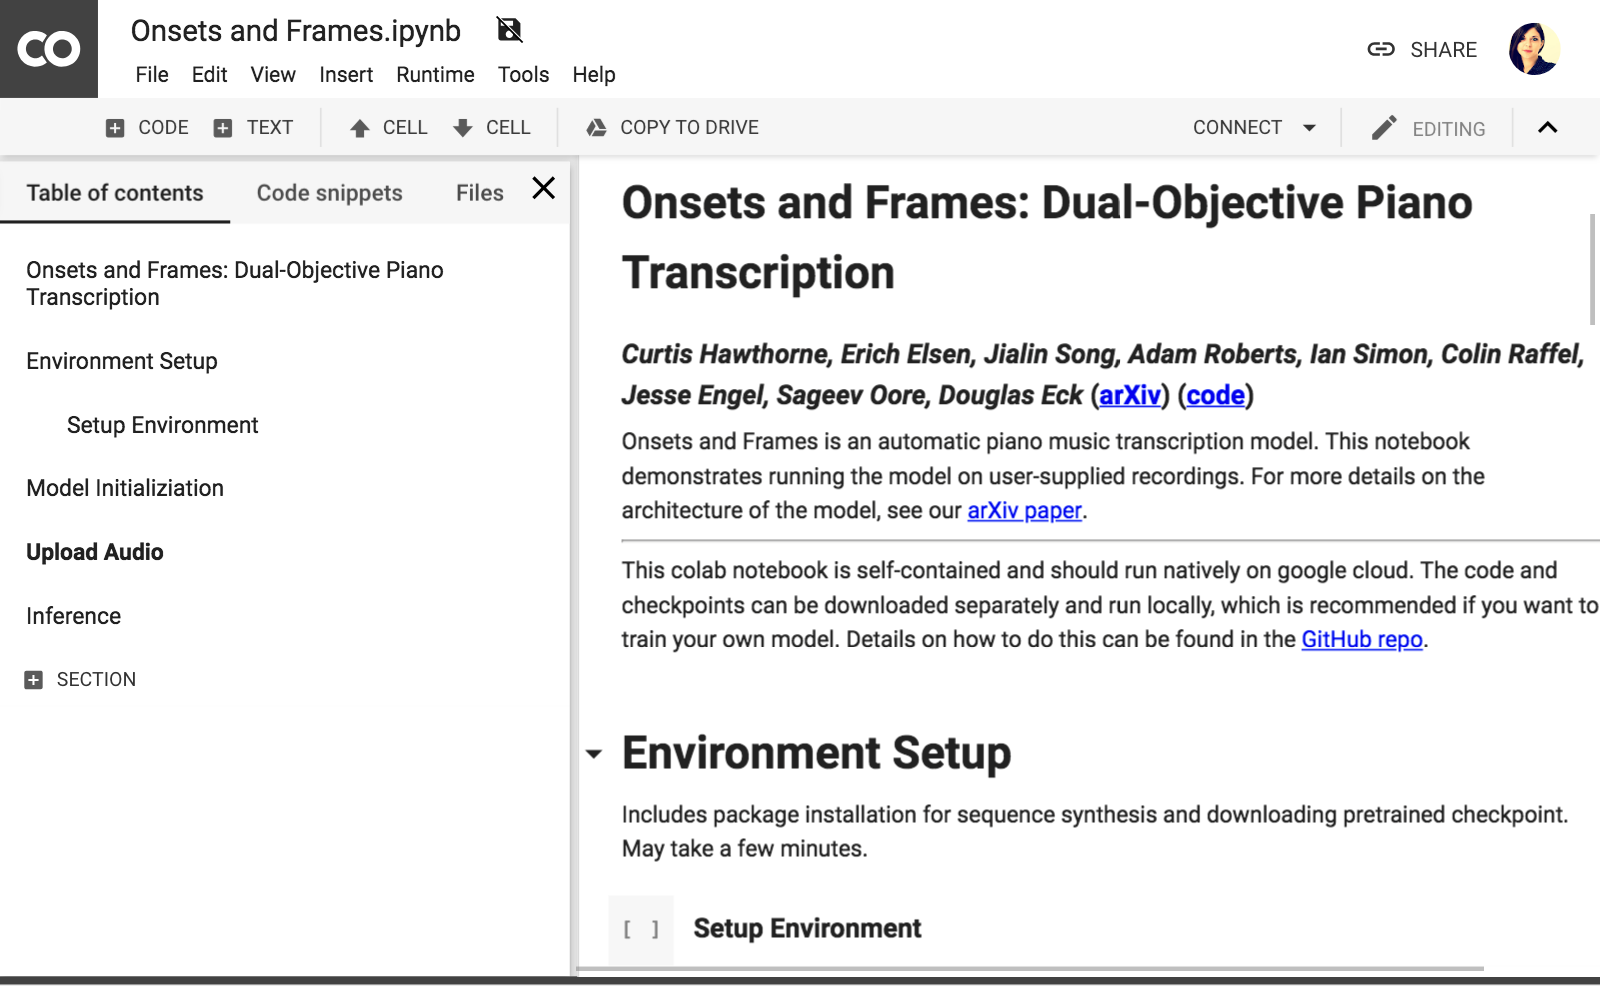 overview of Onsets and Frames